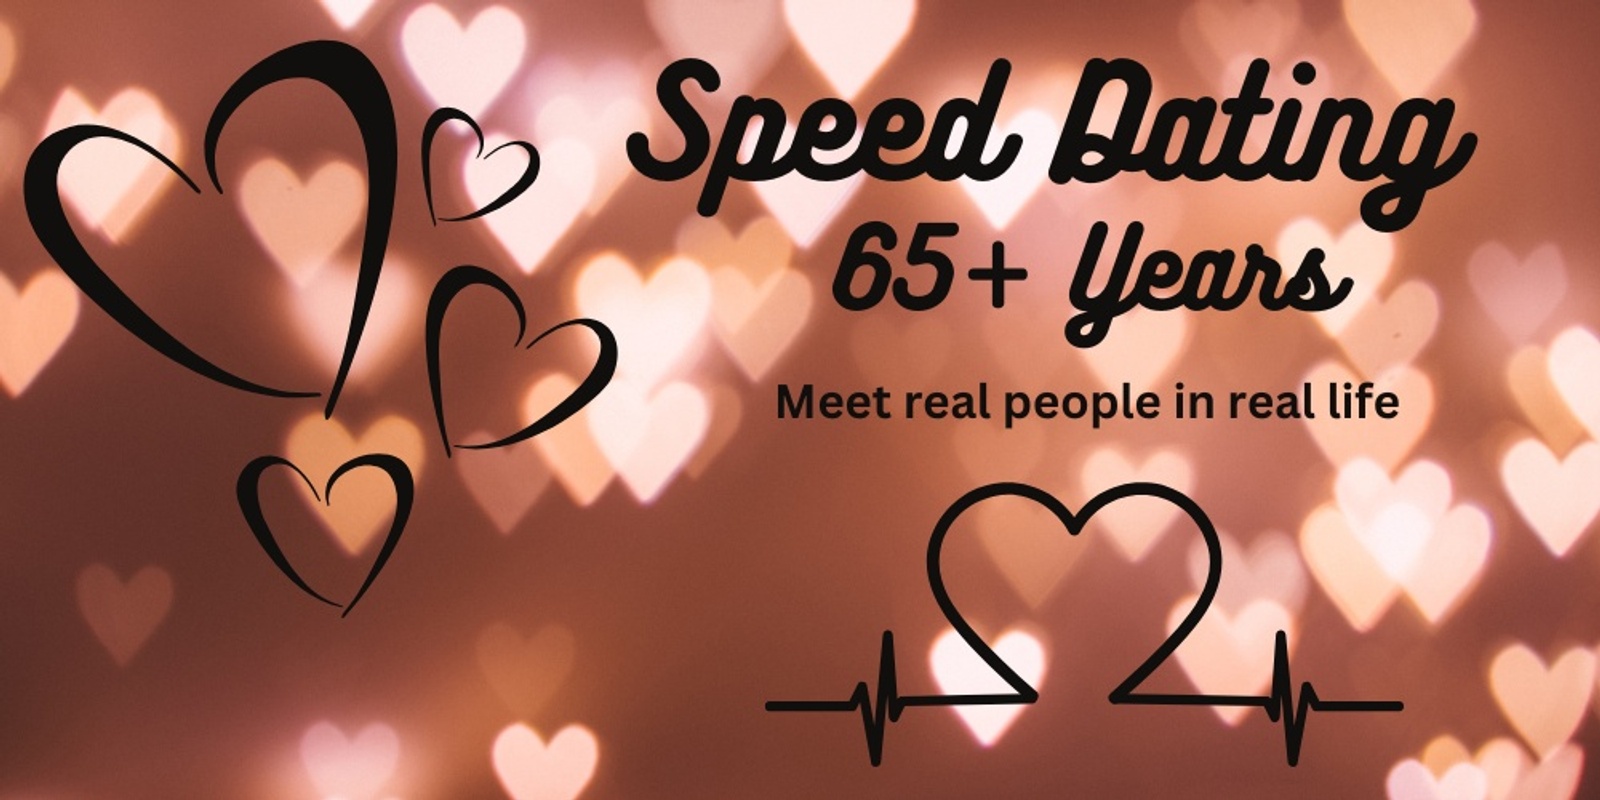 65+ Years Lunch Speed Dating